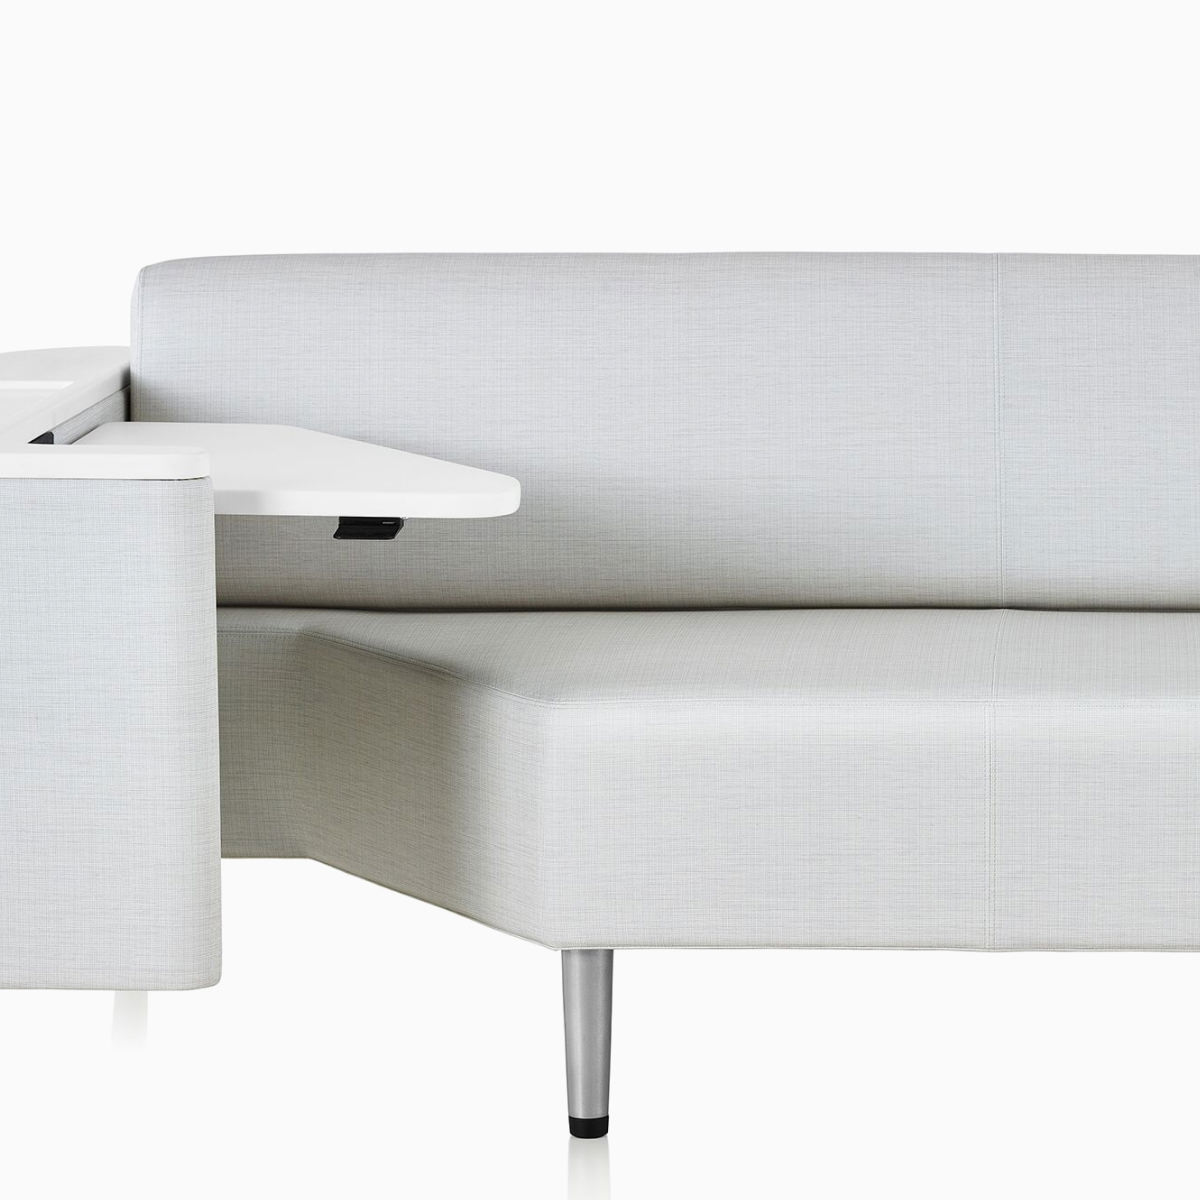 Detail of the seat and back cushion on a Nemschoff Palisade Flop Sofa.